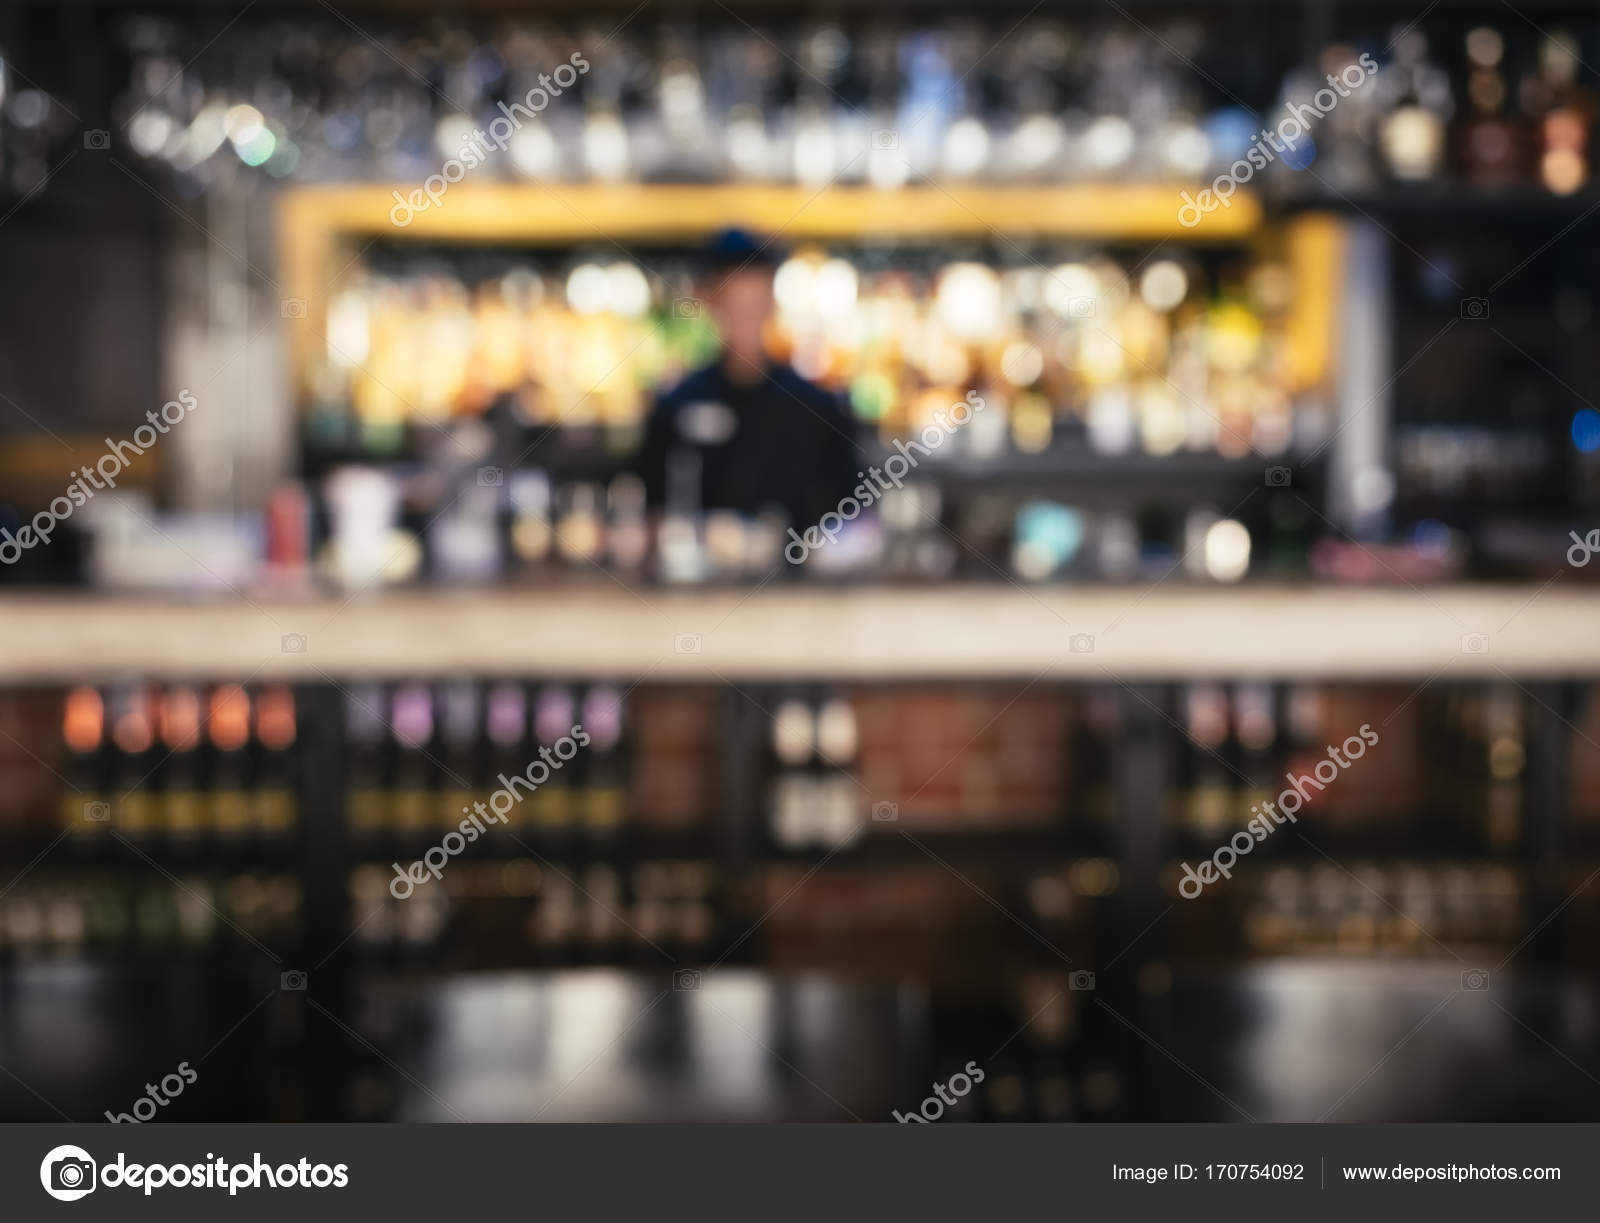 Bartender with blur Bar shelf background Nightlife party Stock Photo by  ©viteethumb 170754092